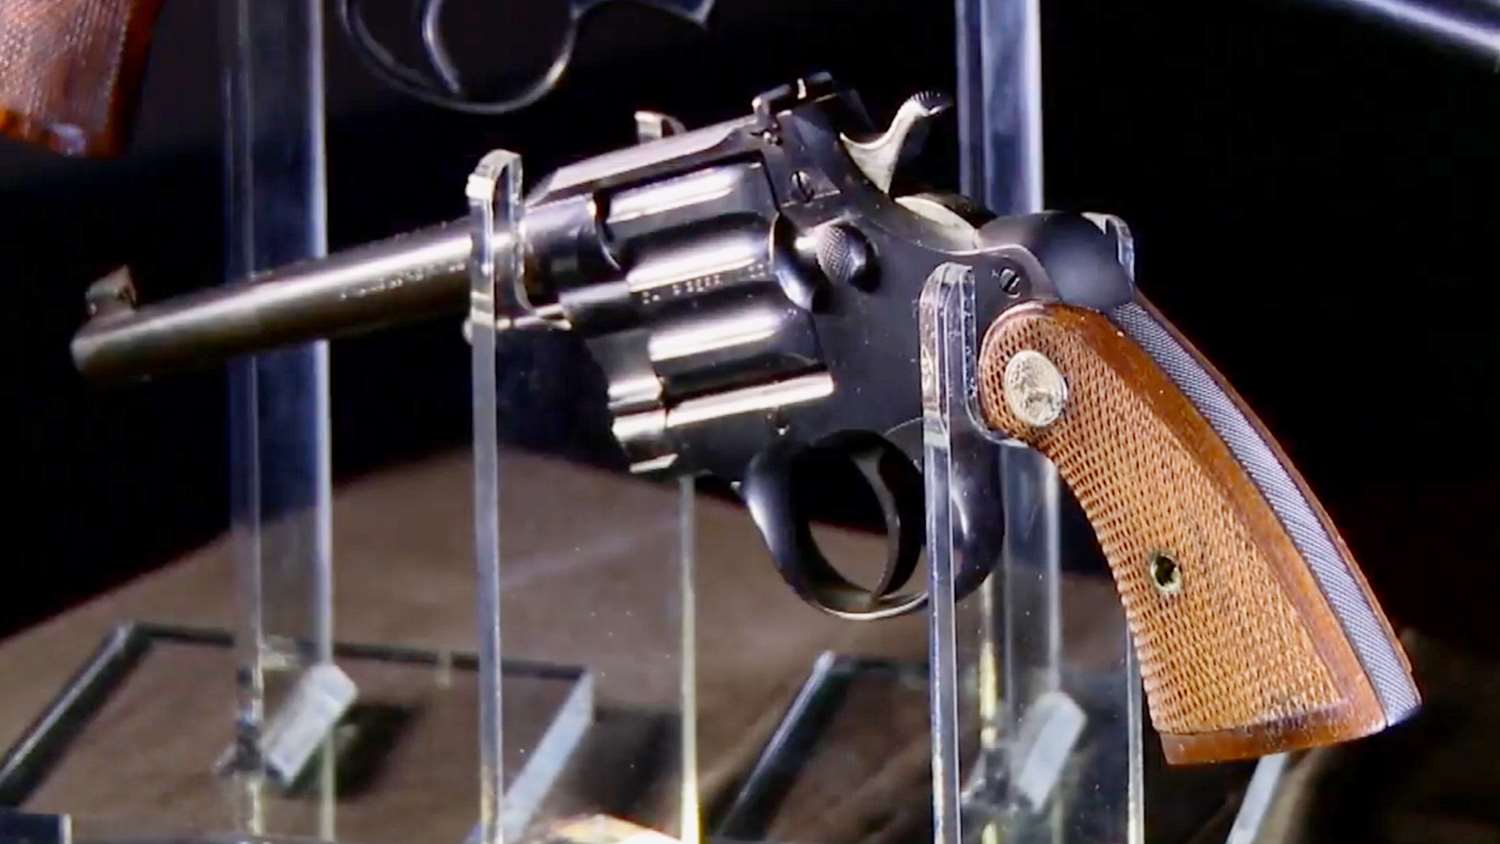 Colt Camp Perry Pistol | NRA National Firearms Museum